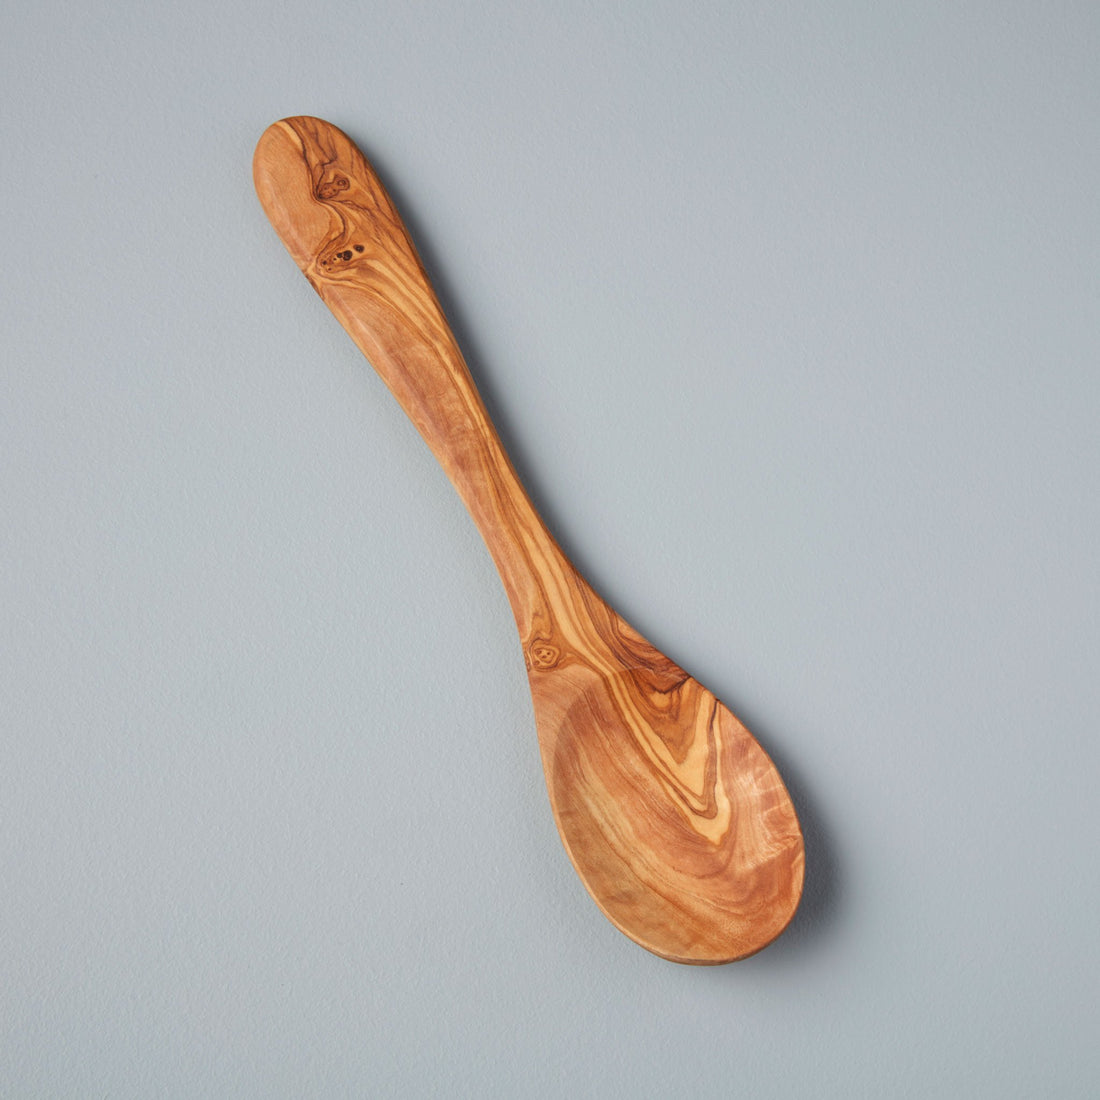 https://cdn.shopify.com/s/files/1/0376/0920/9900/products/Be-Home_Olive-Wood-Cooking-Spoon_51-02_1424c58f-7d07-44ba-b64e-3f682fc991ac.jpg?v=1683235050&width=1100